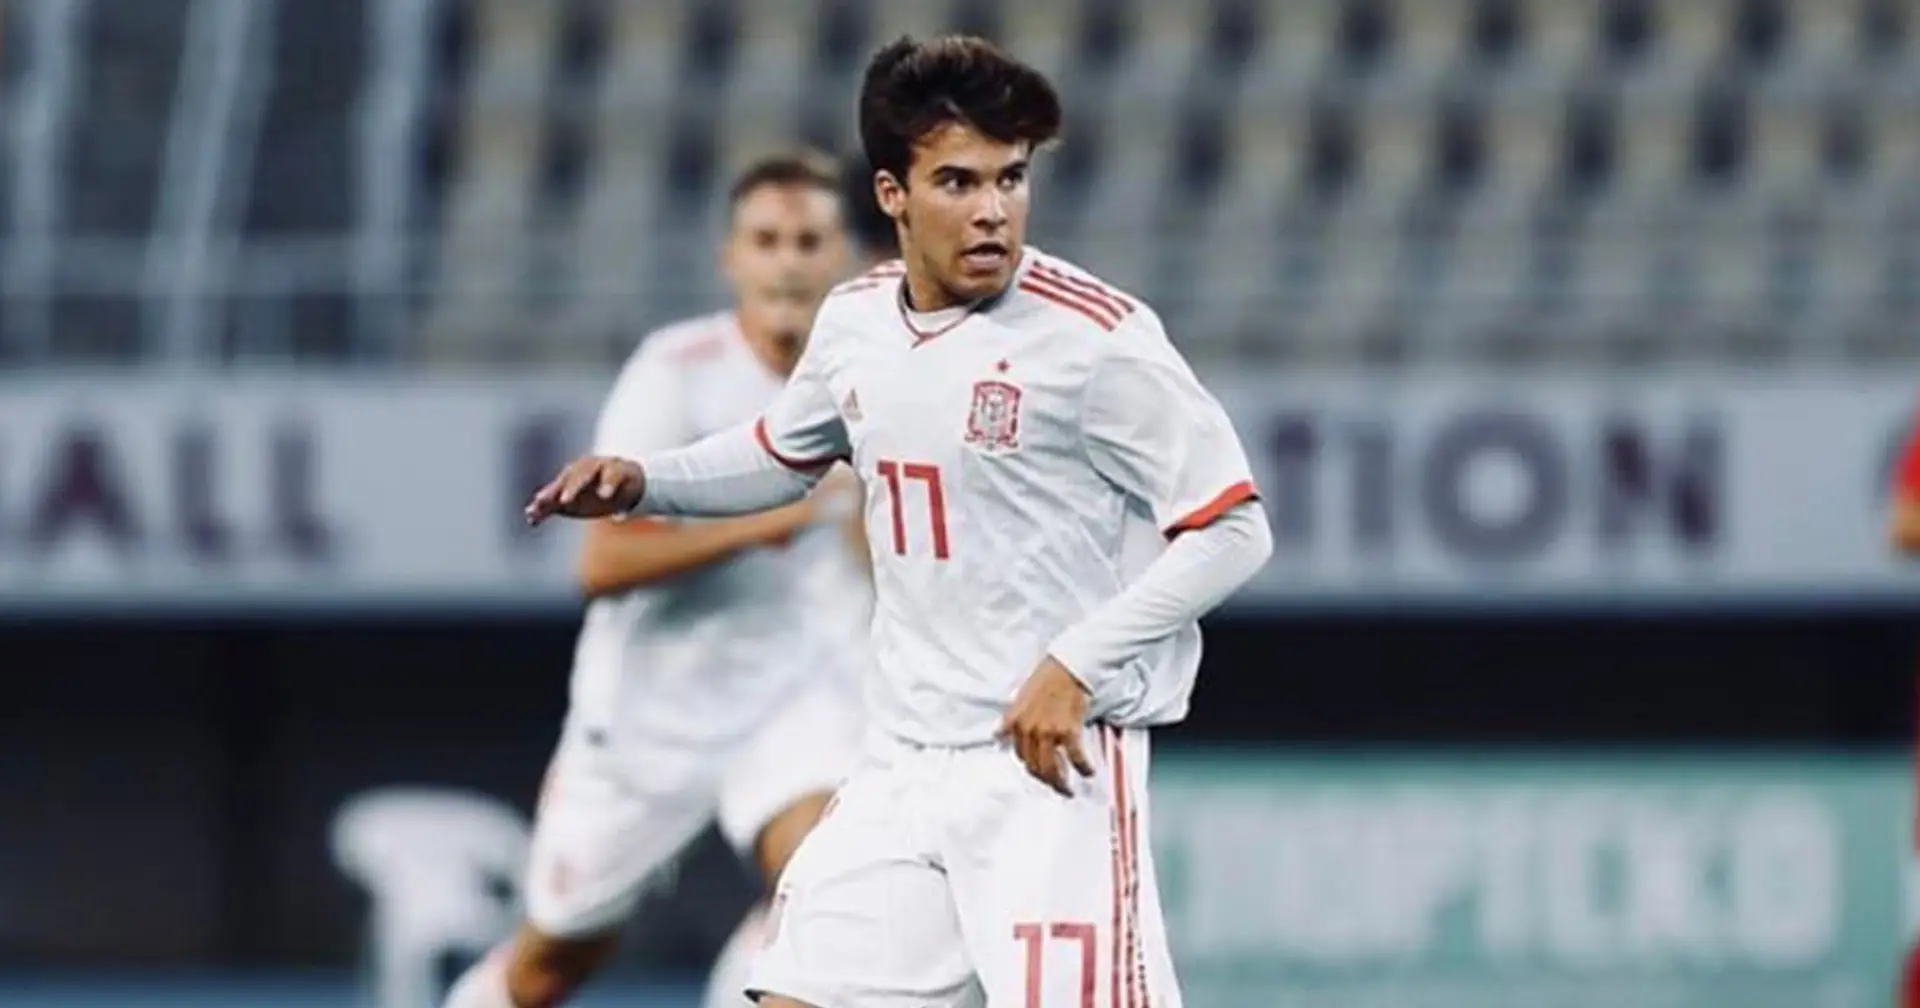 Riqui Puig makes debut appearance for Spain in any age category